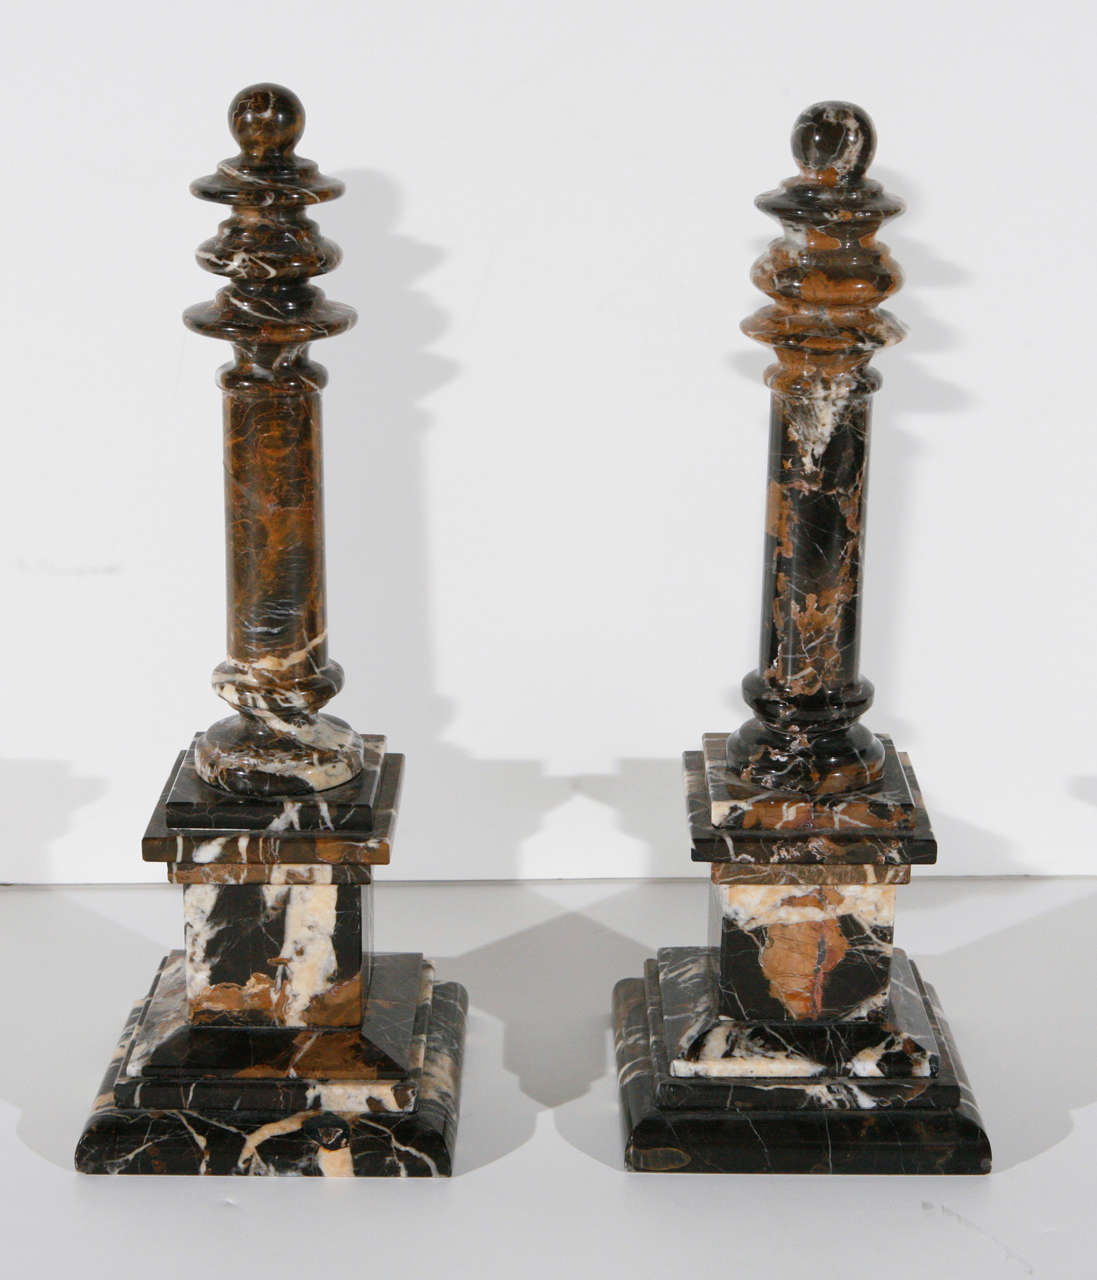 Pair of turn-of-the-century, hand-carved, chocolate marble obelisks with turned pinnacles.